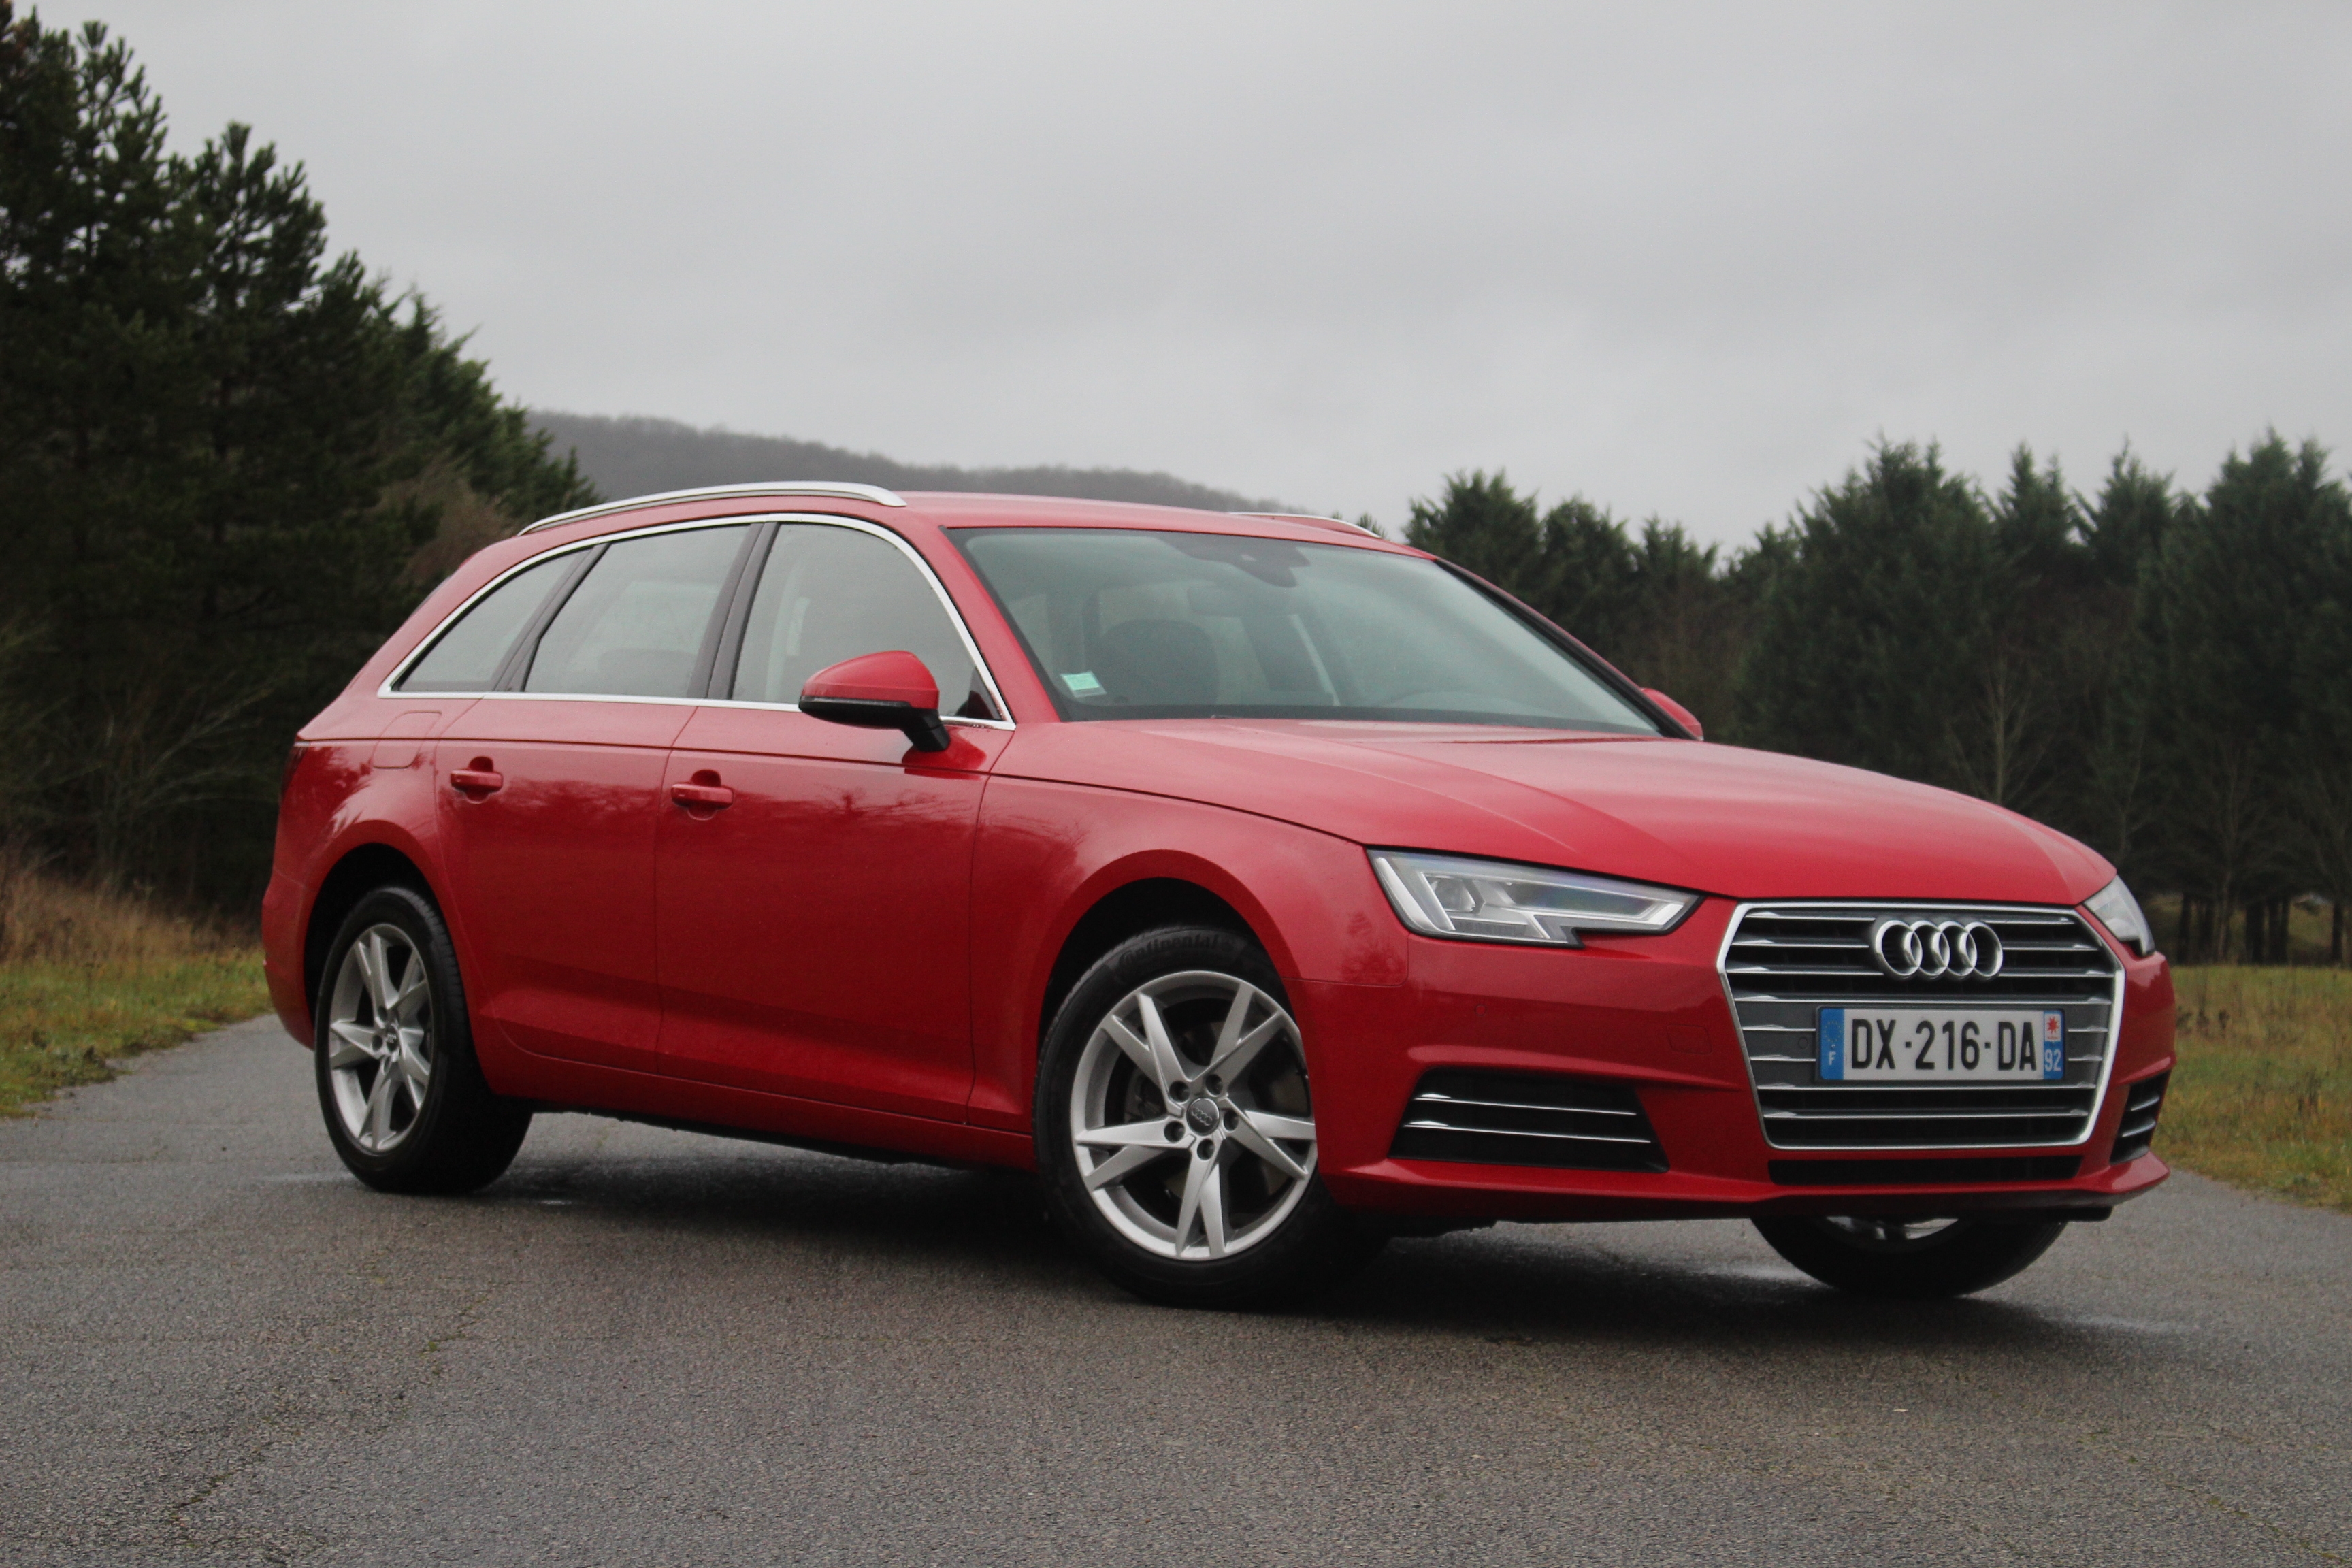 Audi A4 Avant wagon specifications